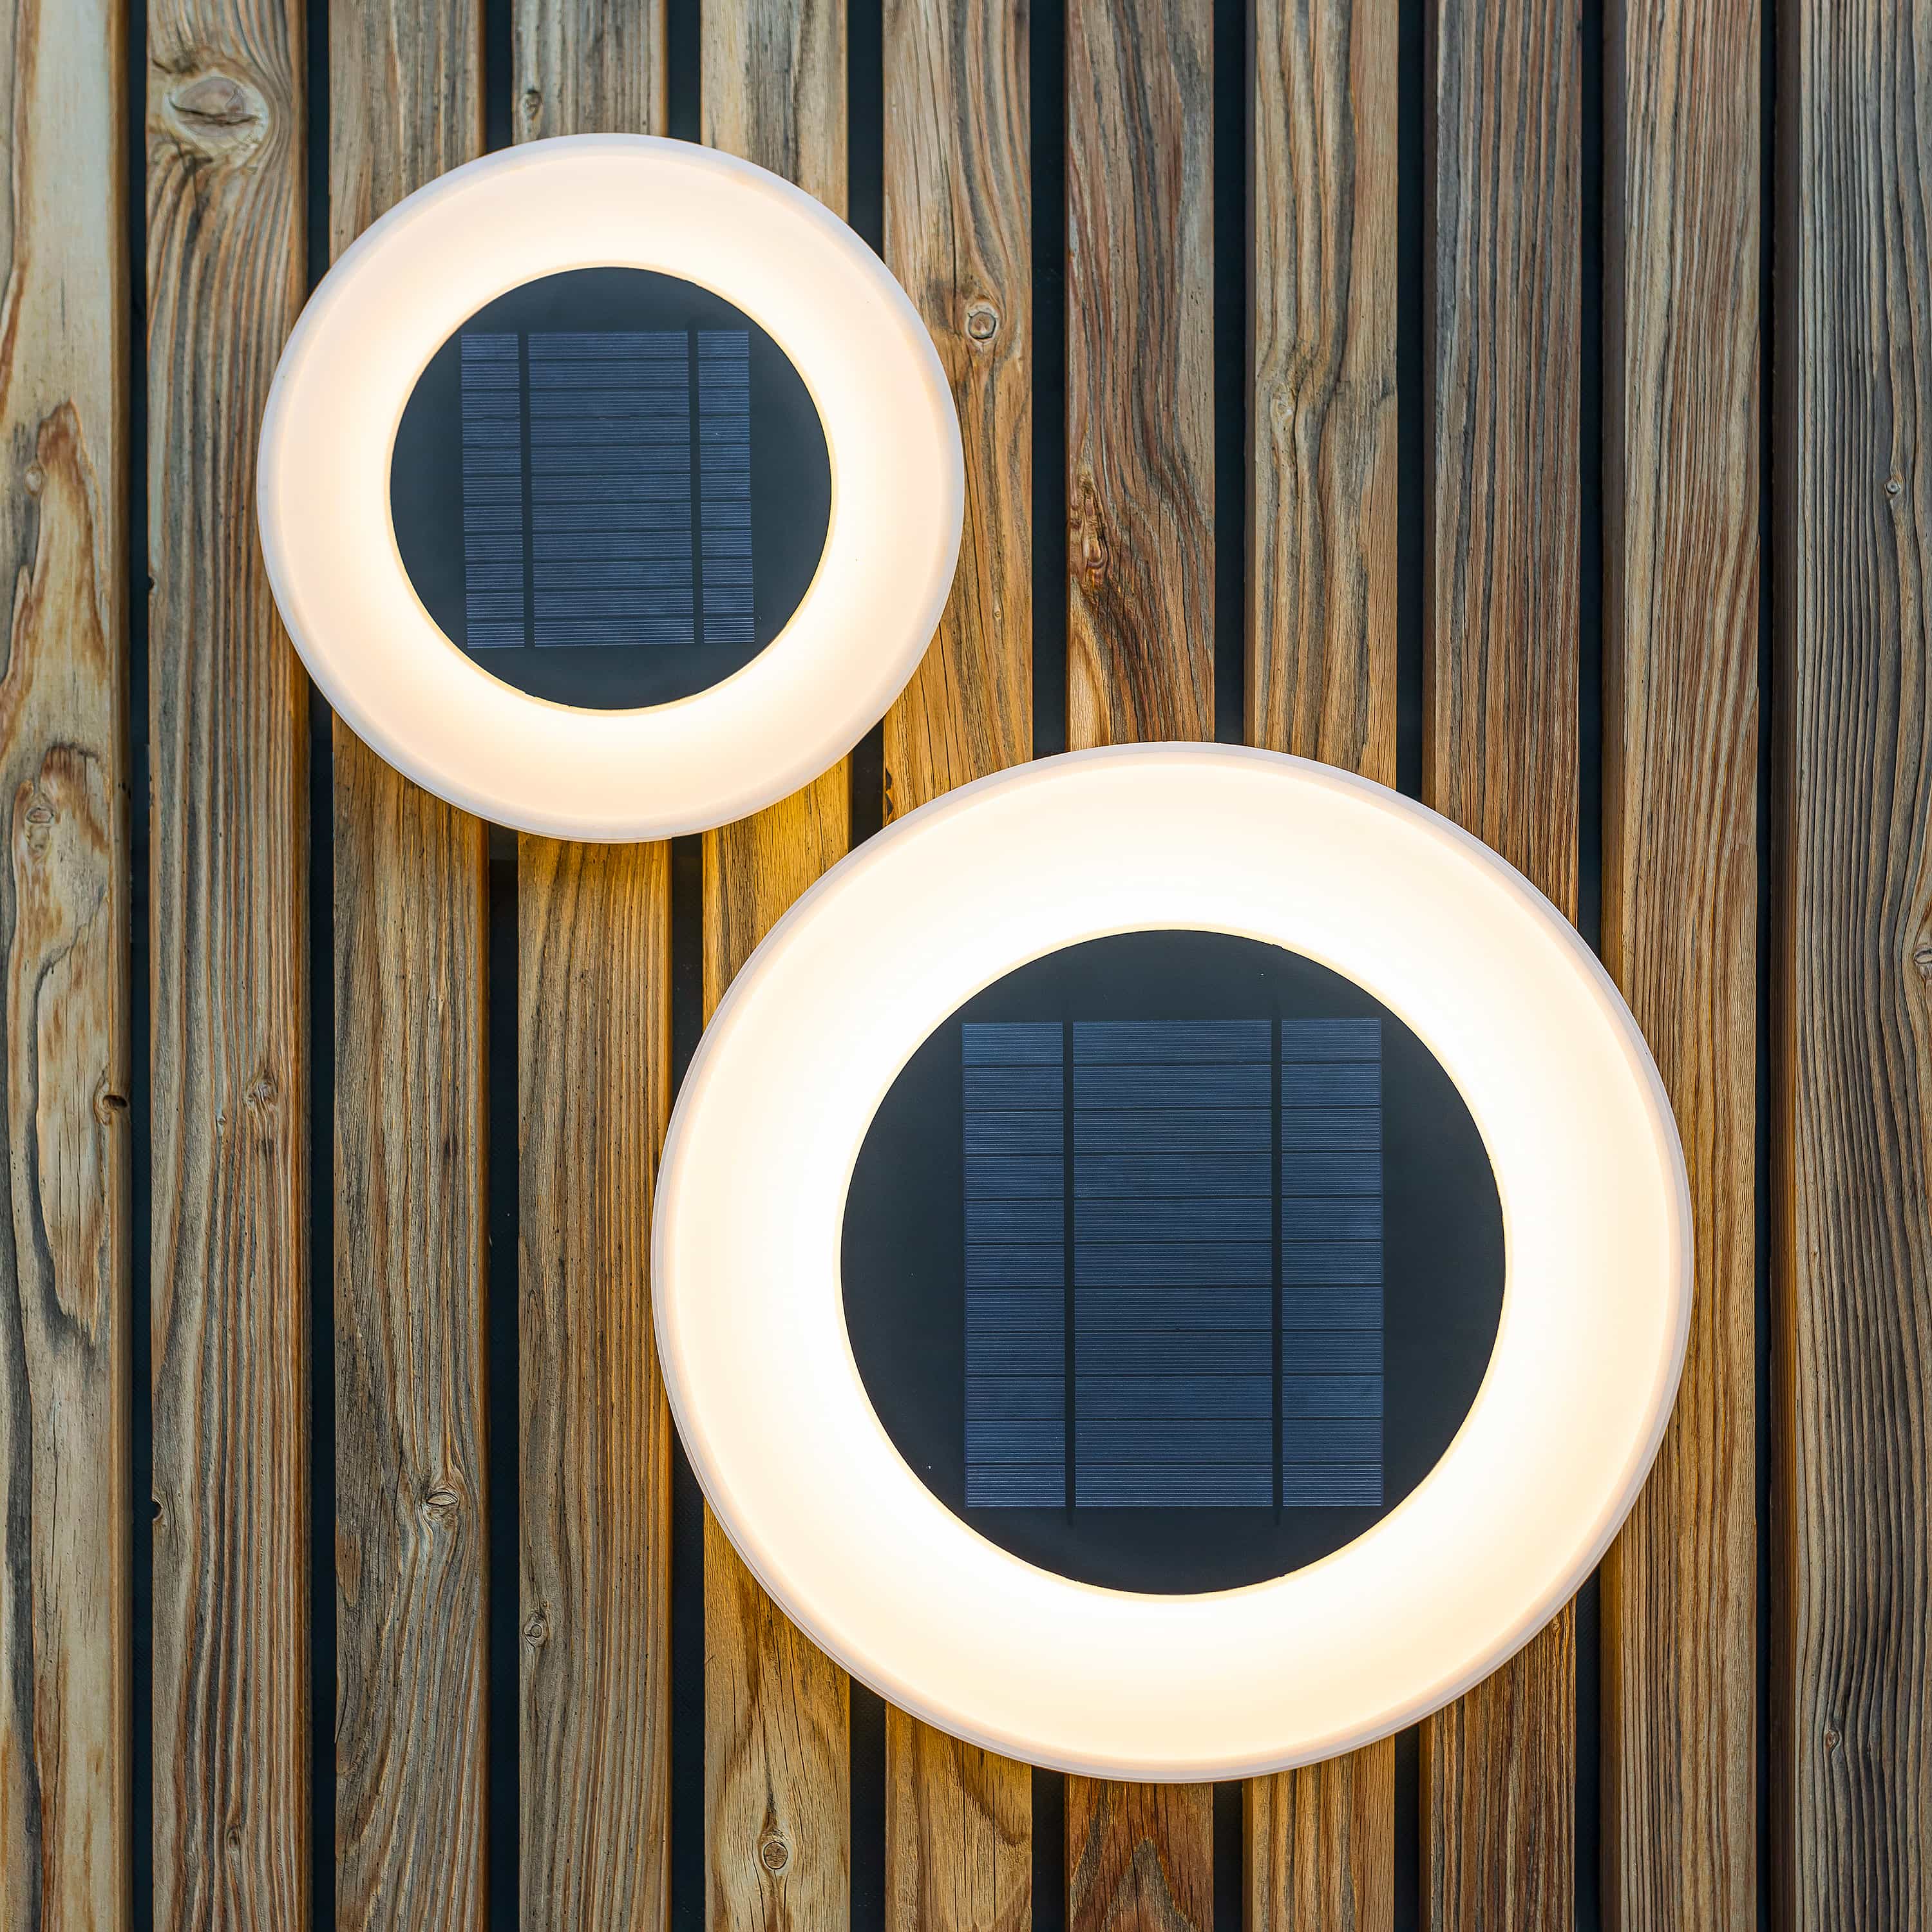 Illuminate your space sustainably with Wally, Newgarden's solar-powered wall light, crafted from recycled ocean plastics.